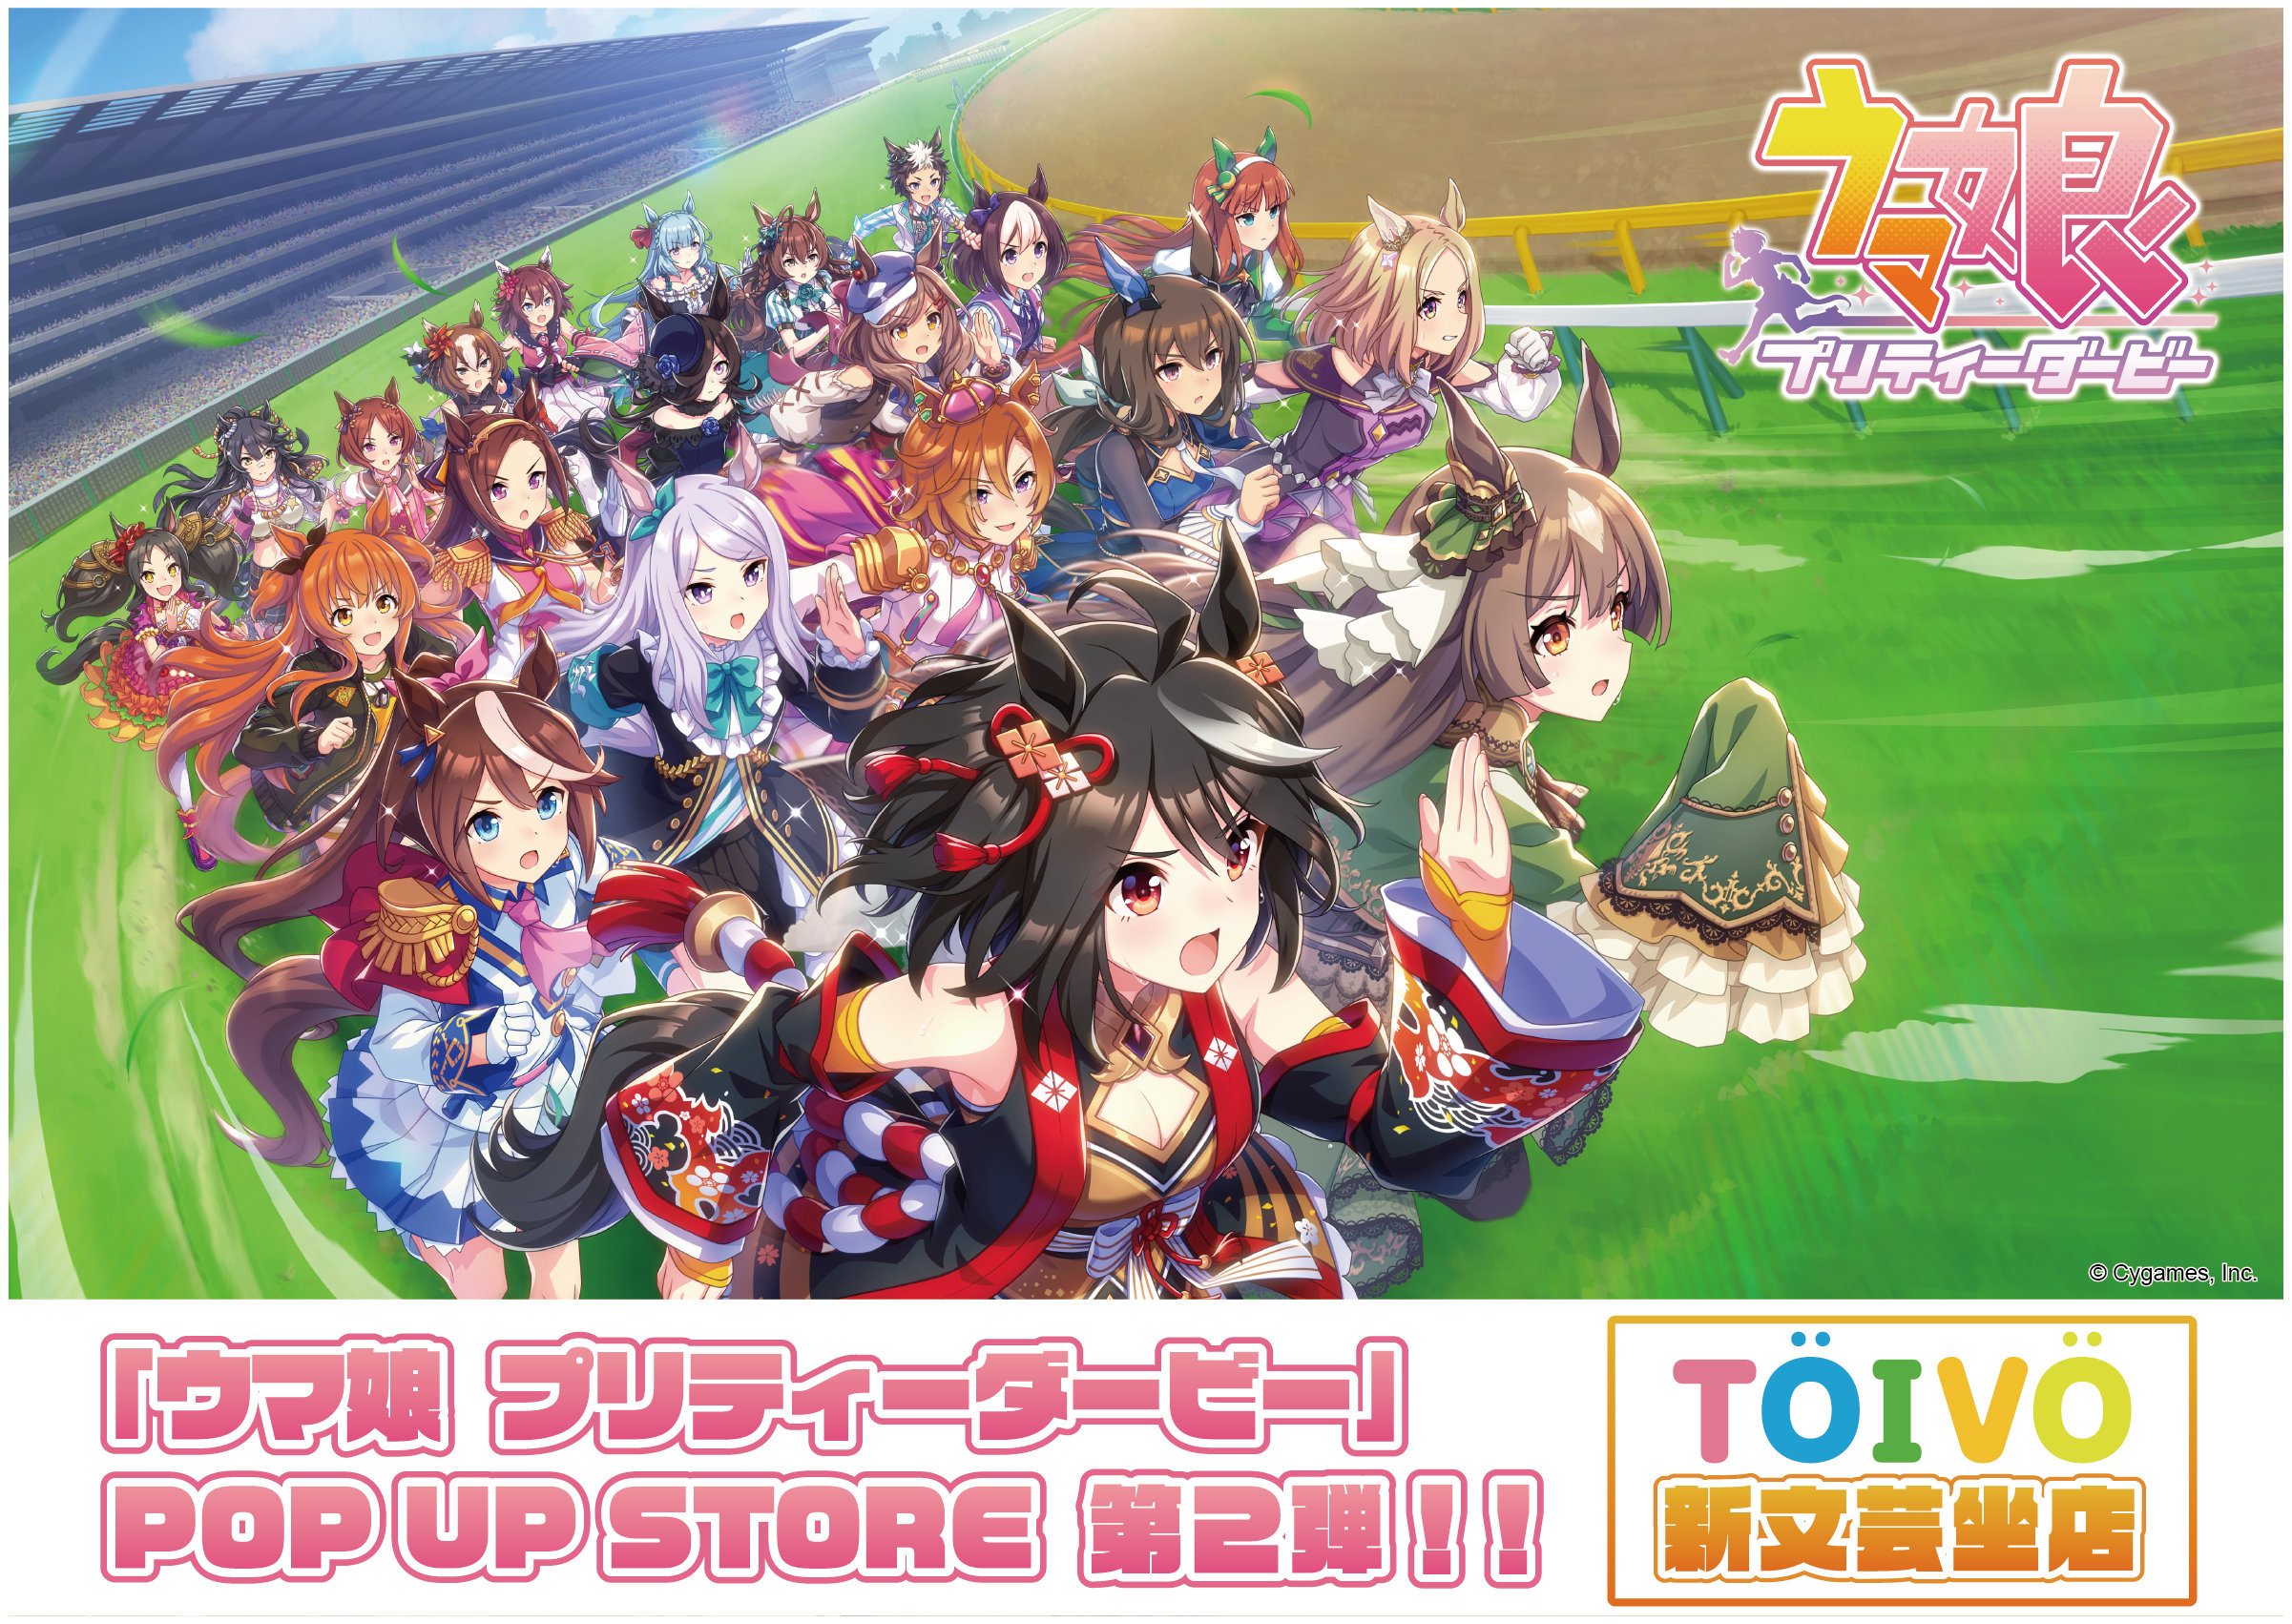 The second pop-up store “Uma Musume” will be held from December 26. At the POP UP store “TOIVO” Shinbungeiza in Ikebukuro, Tokyo